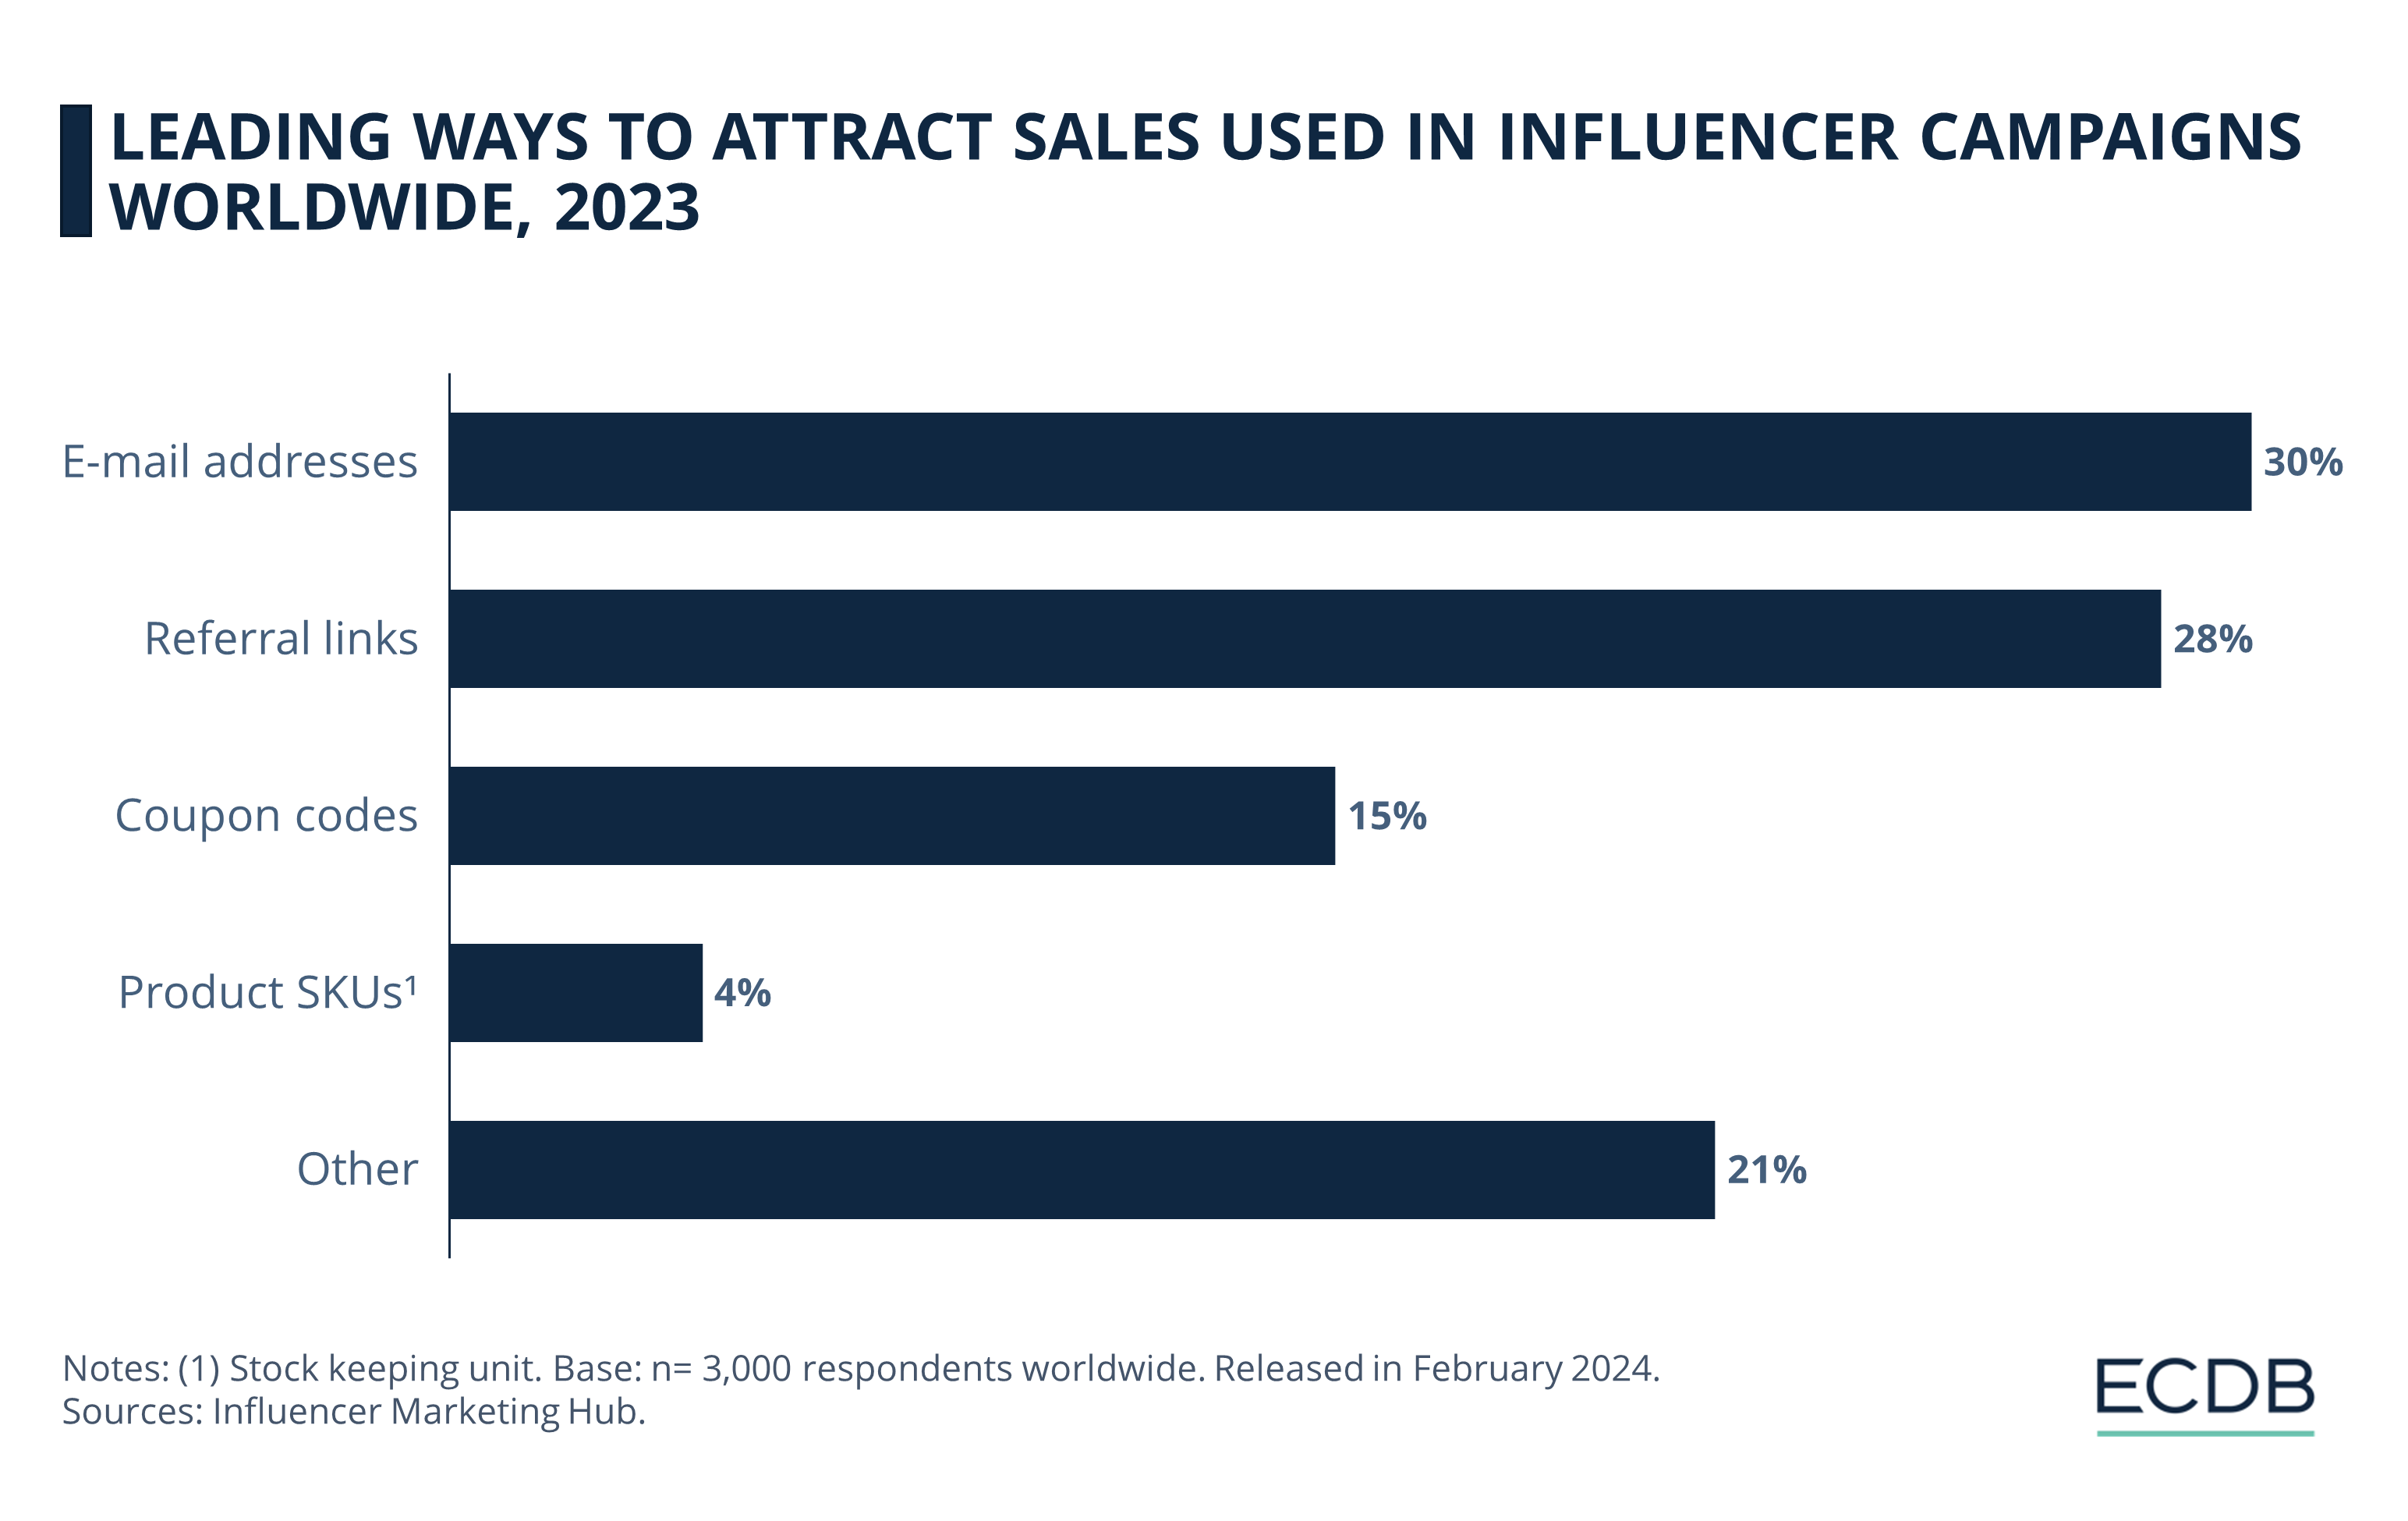 Leading Ways To Attract Sales Used in Influencer Campaigns Worldwide, 2023